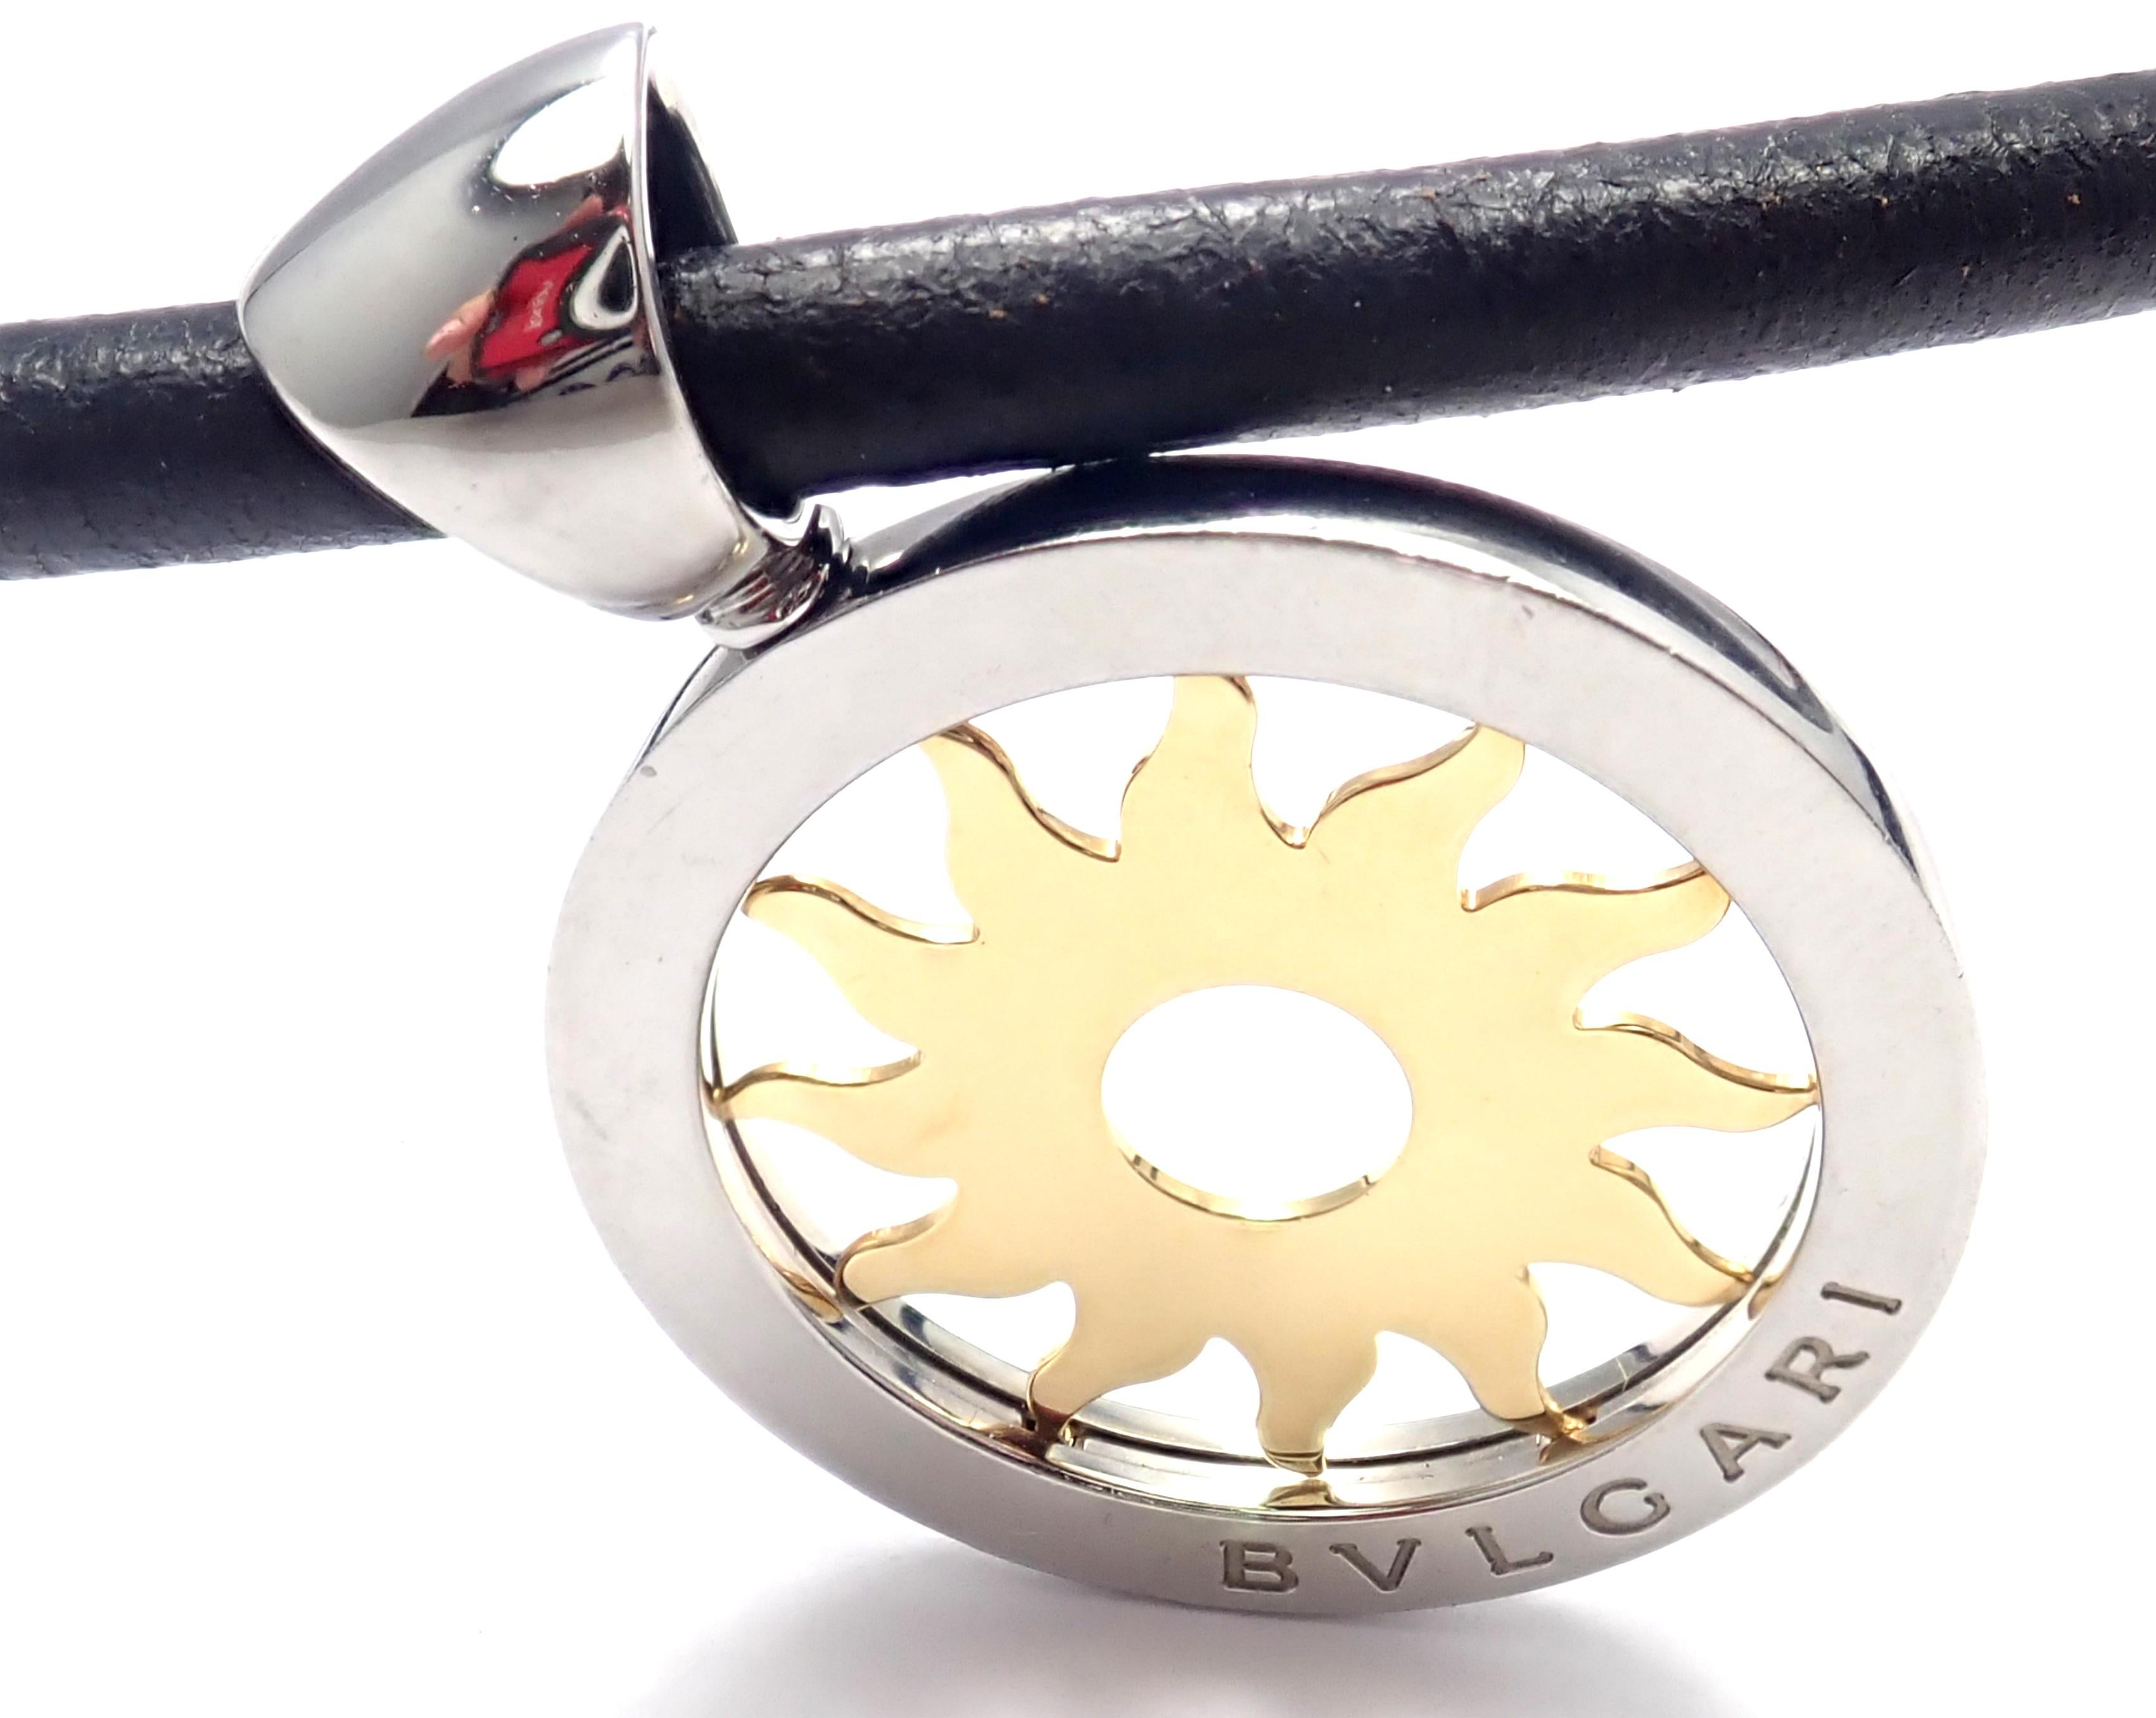 18k yellow gold and stainless steel Tondo Sun pendant necklace by Bulgari.
Details:
Leather Length: 15.5